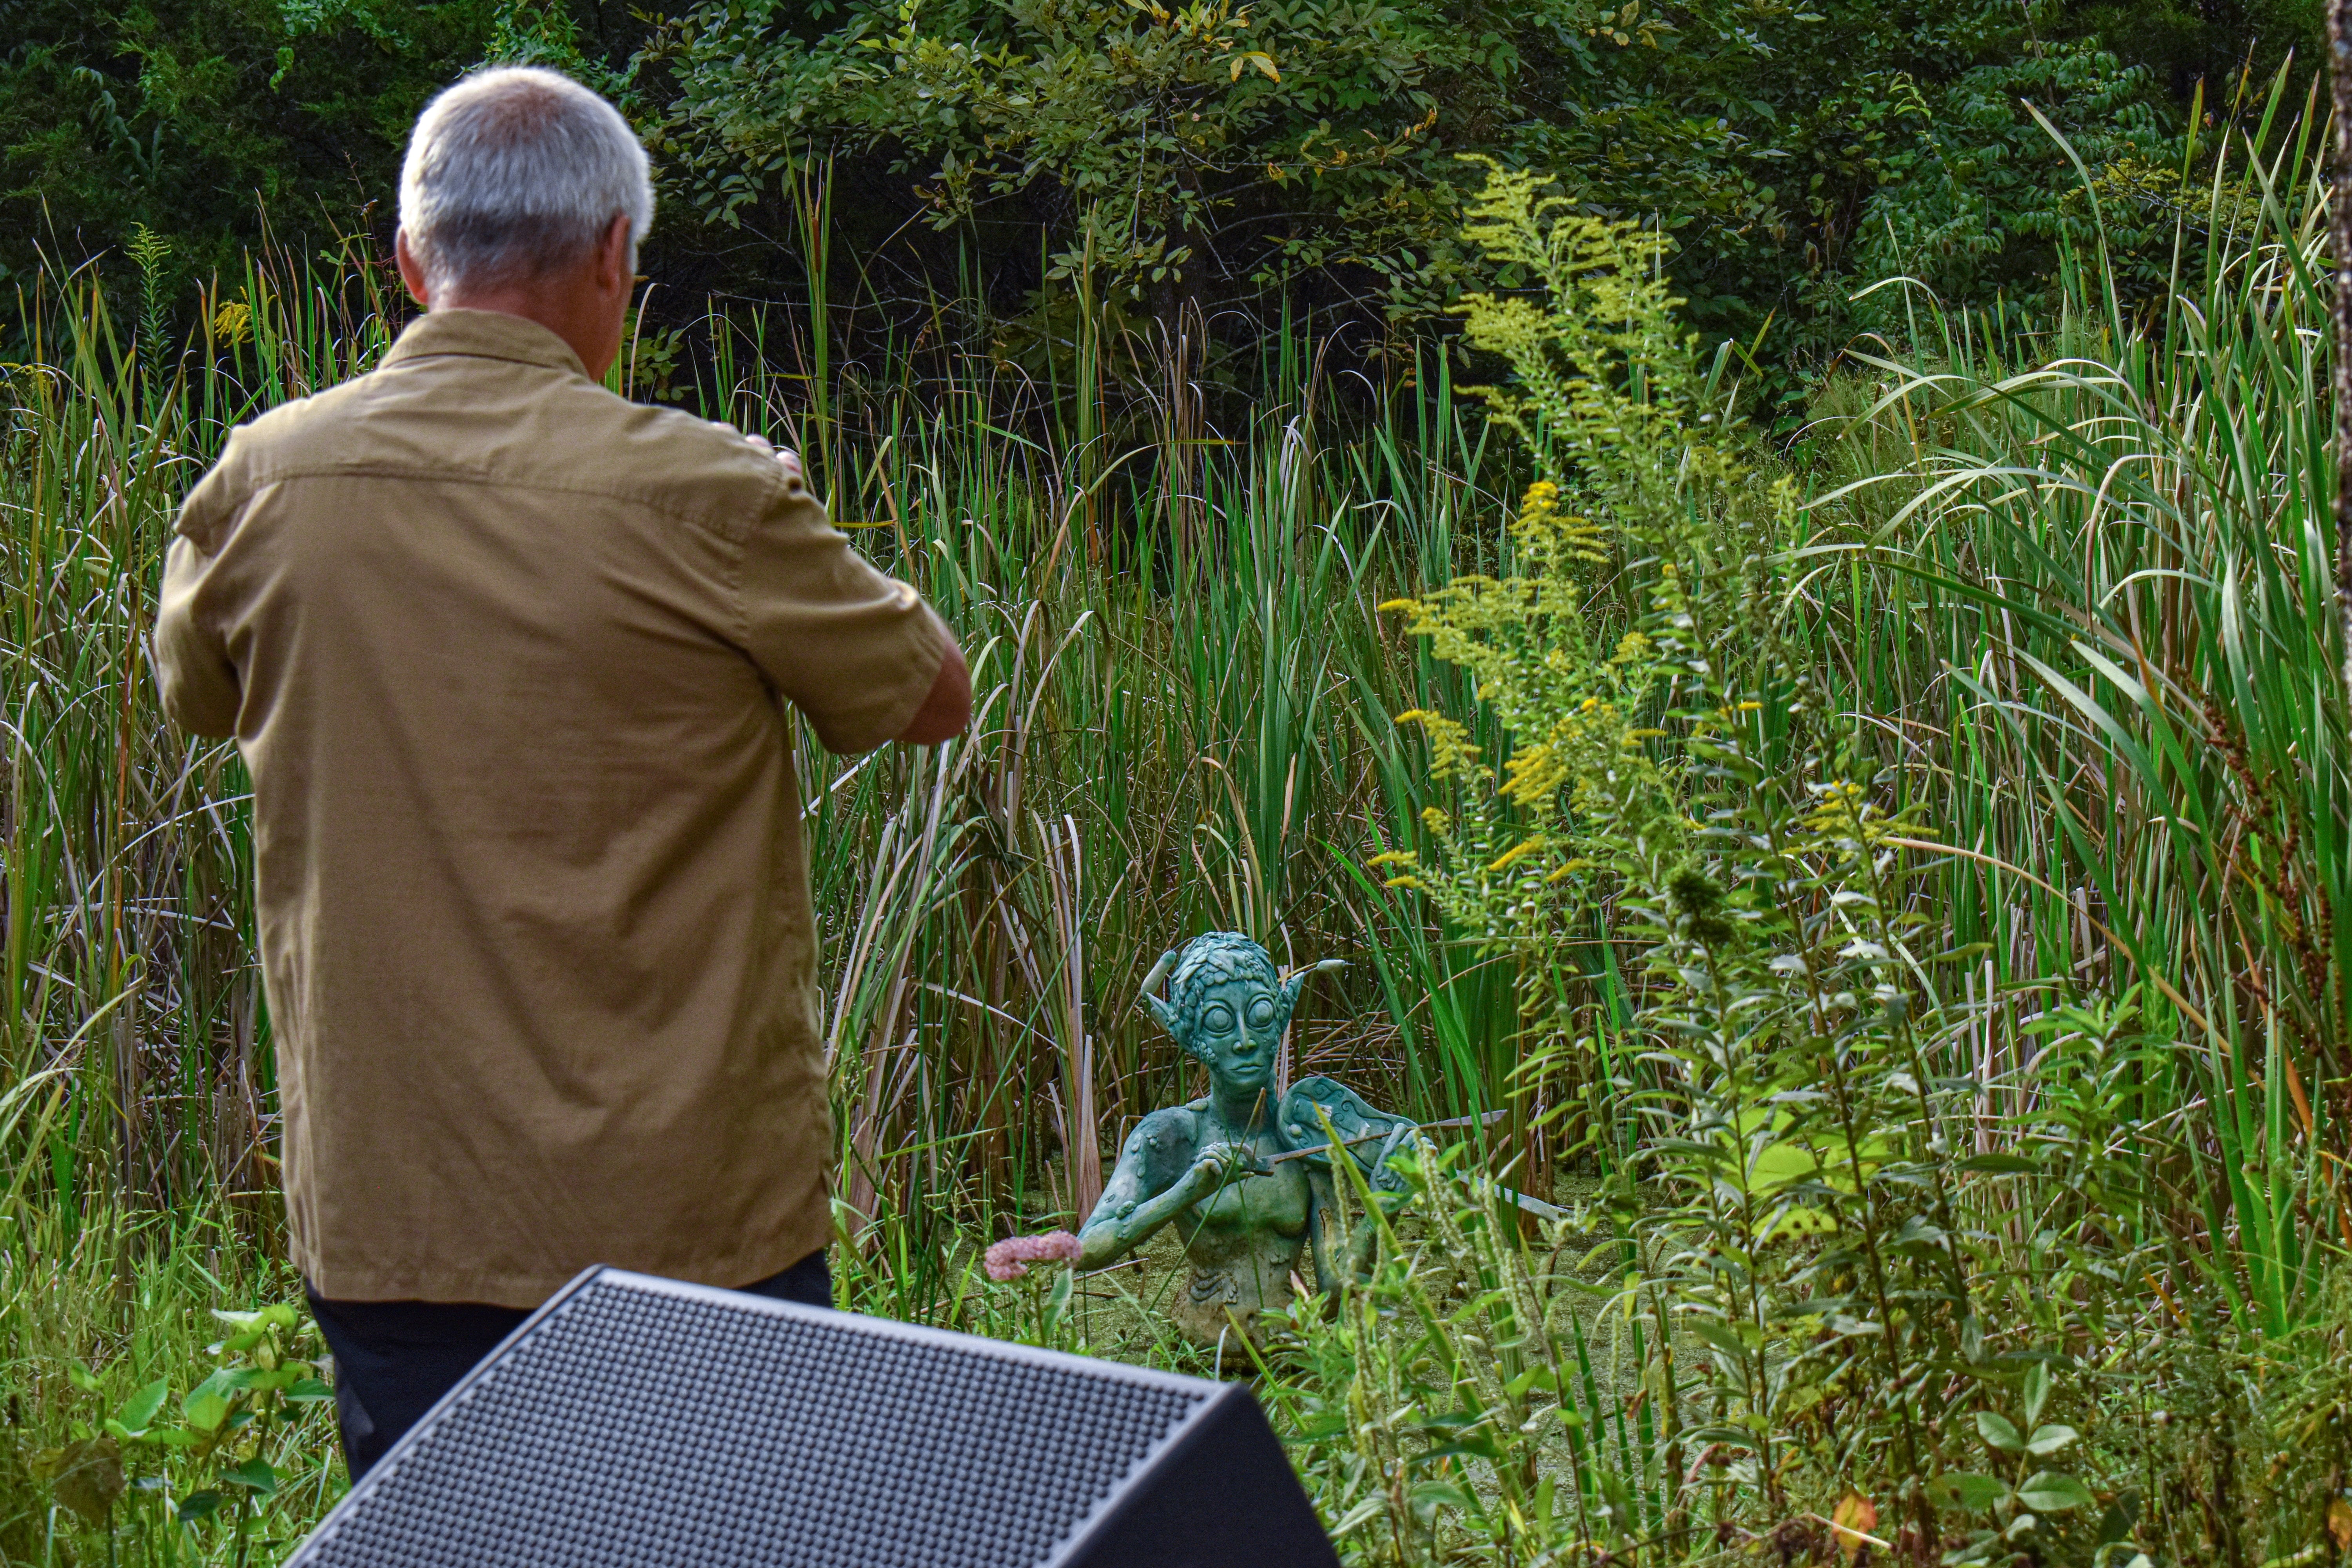 Man taking a picture of a sculpture in the pond. The sculpture is a green, somewhat fishlike, person.